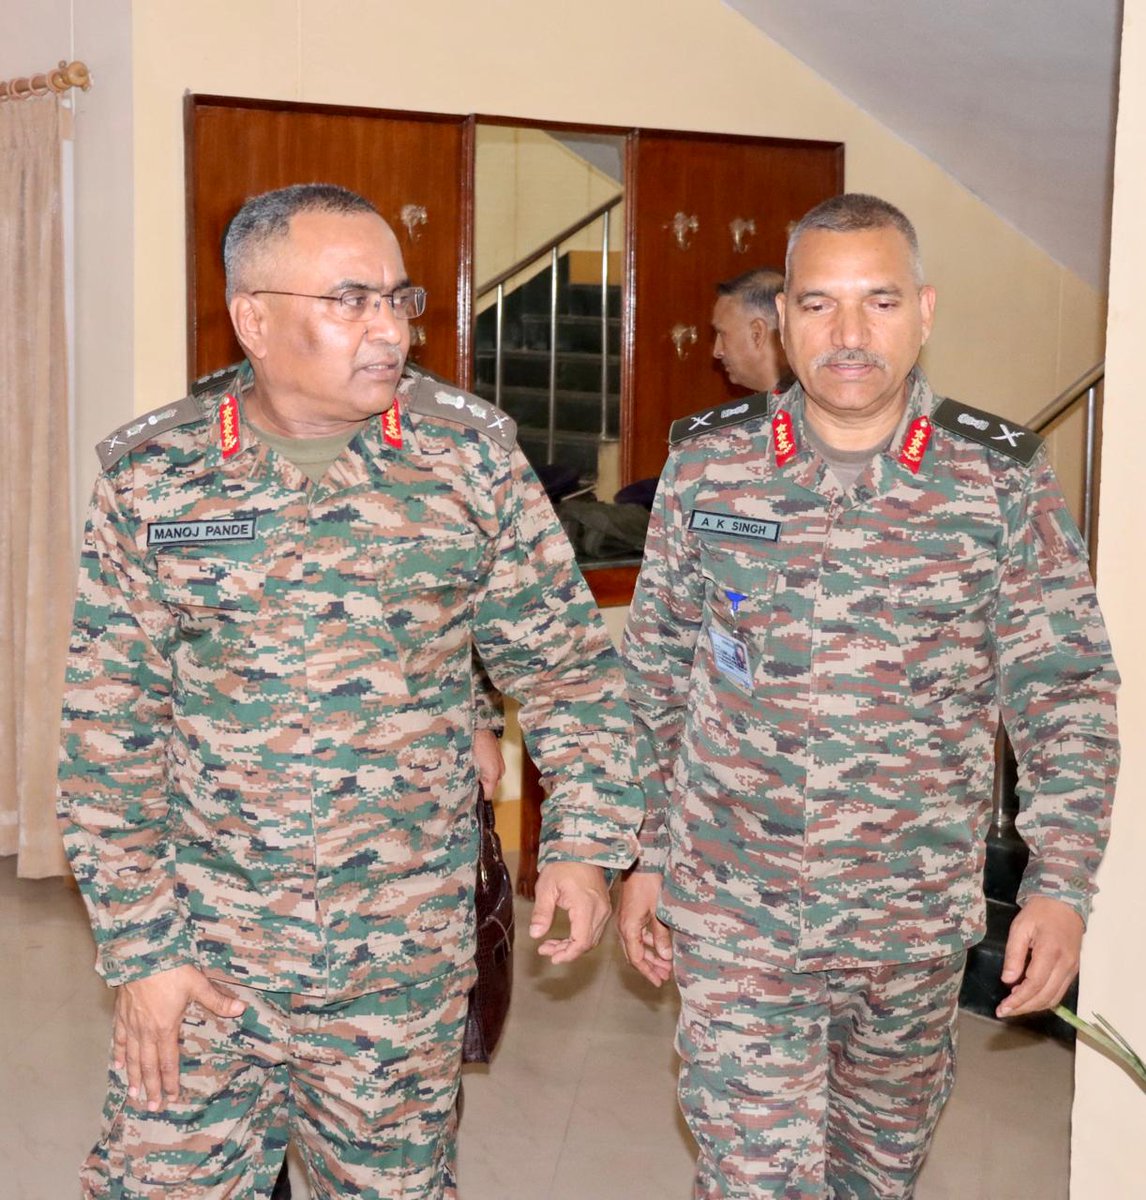 General Manoj Pande #COAS visited #SouthernCommand and was briefed on the operational preparedness and combat readiness. #COAS complimented the Commanders & troops for their steadfastness & professionalism. He emphasised on the need for Technology Absorption in all fields as well…